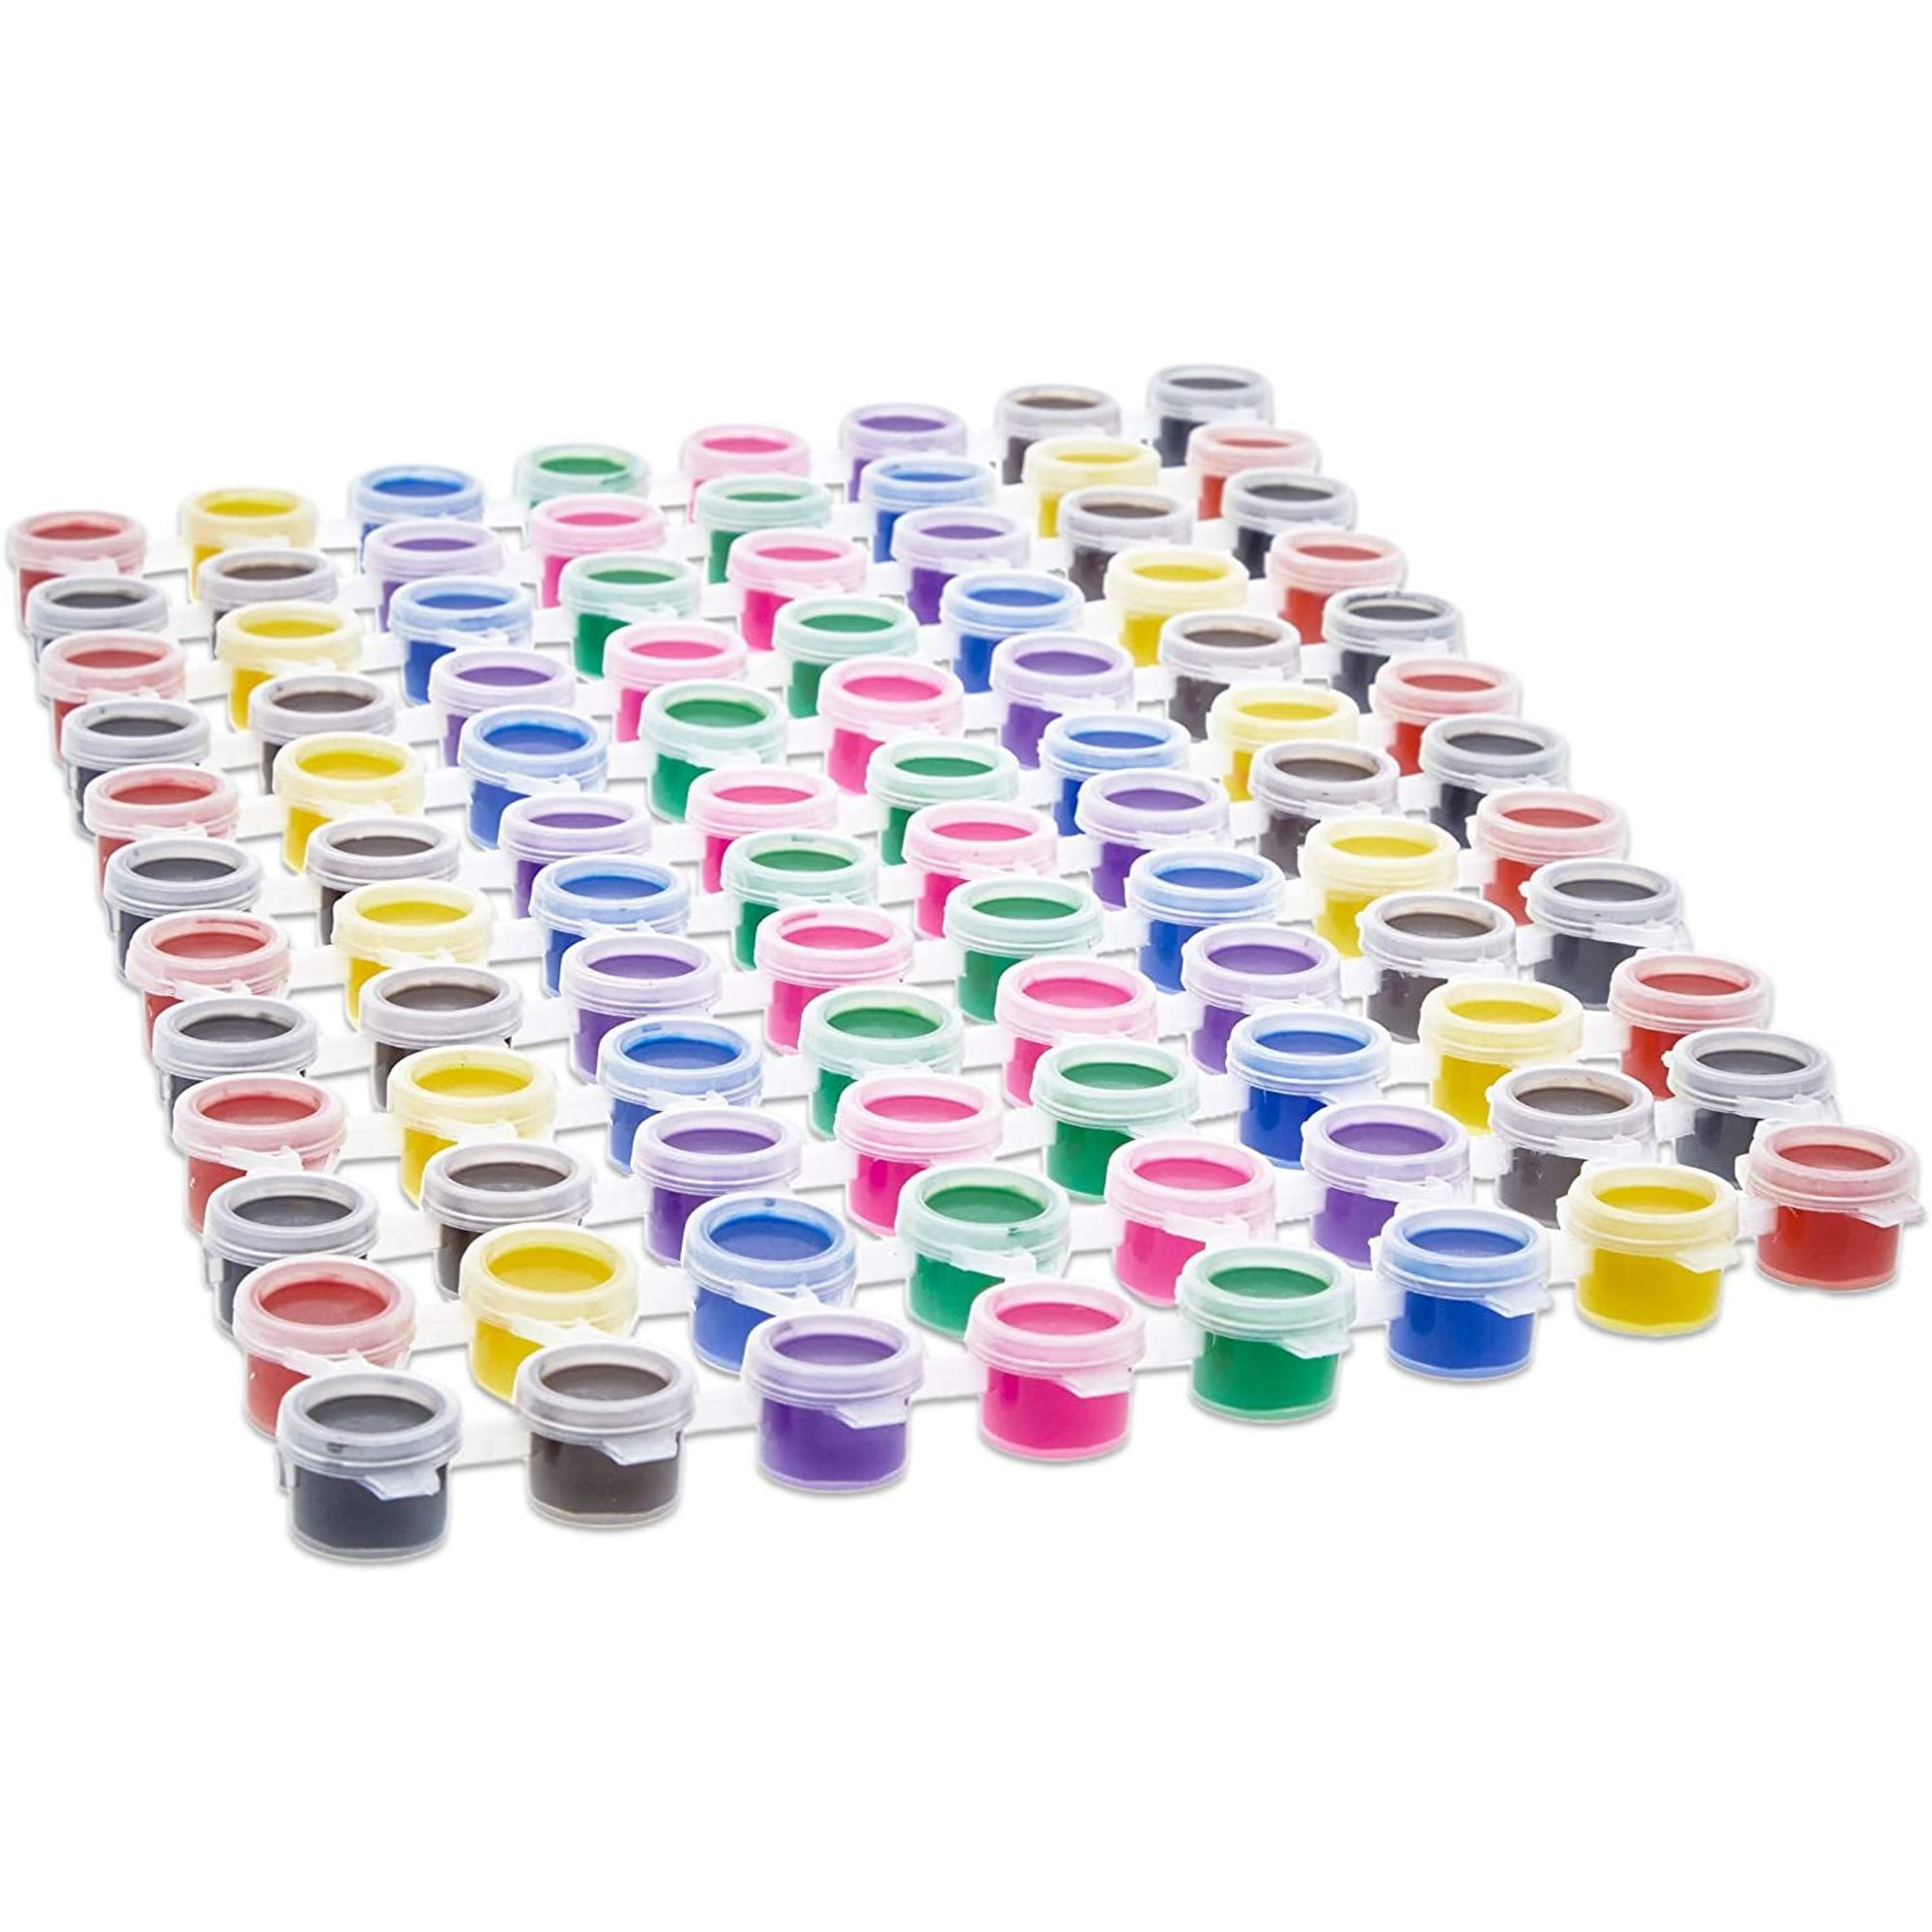 Acrylic Paint Pots for Kids, Classroom, Art and Crafts, 8 Colors (96